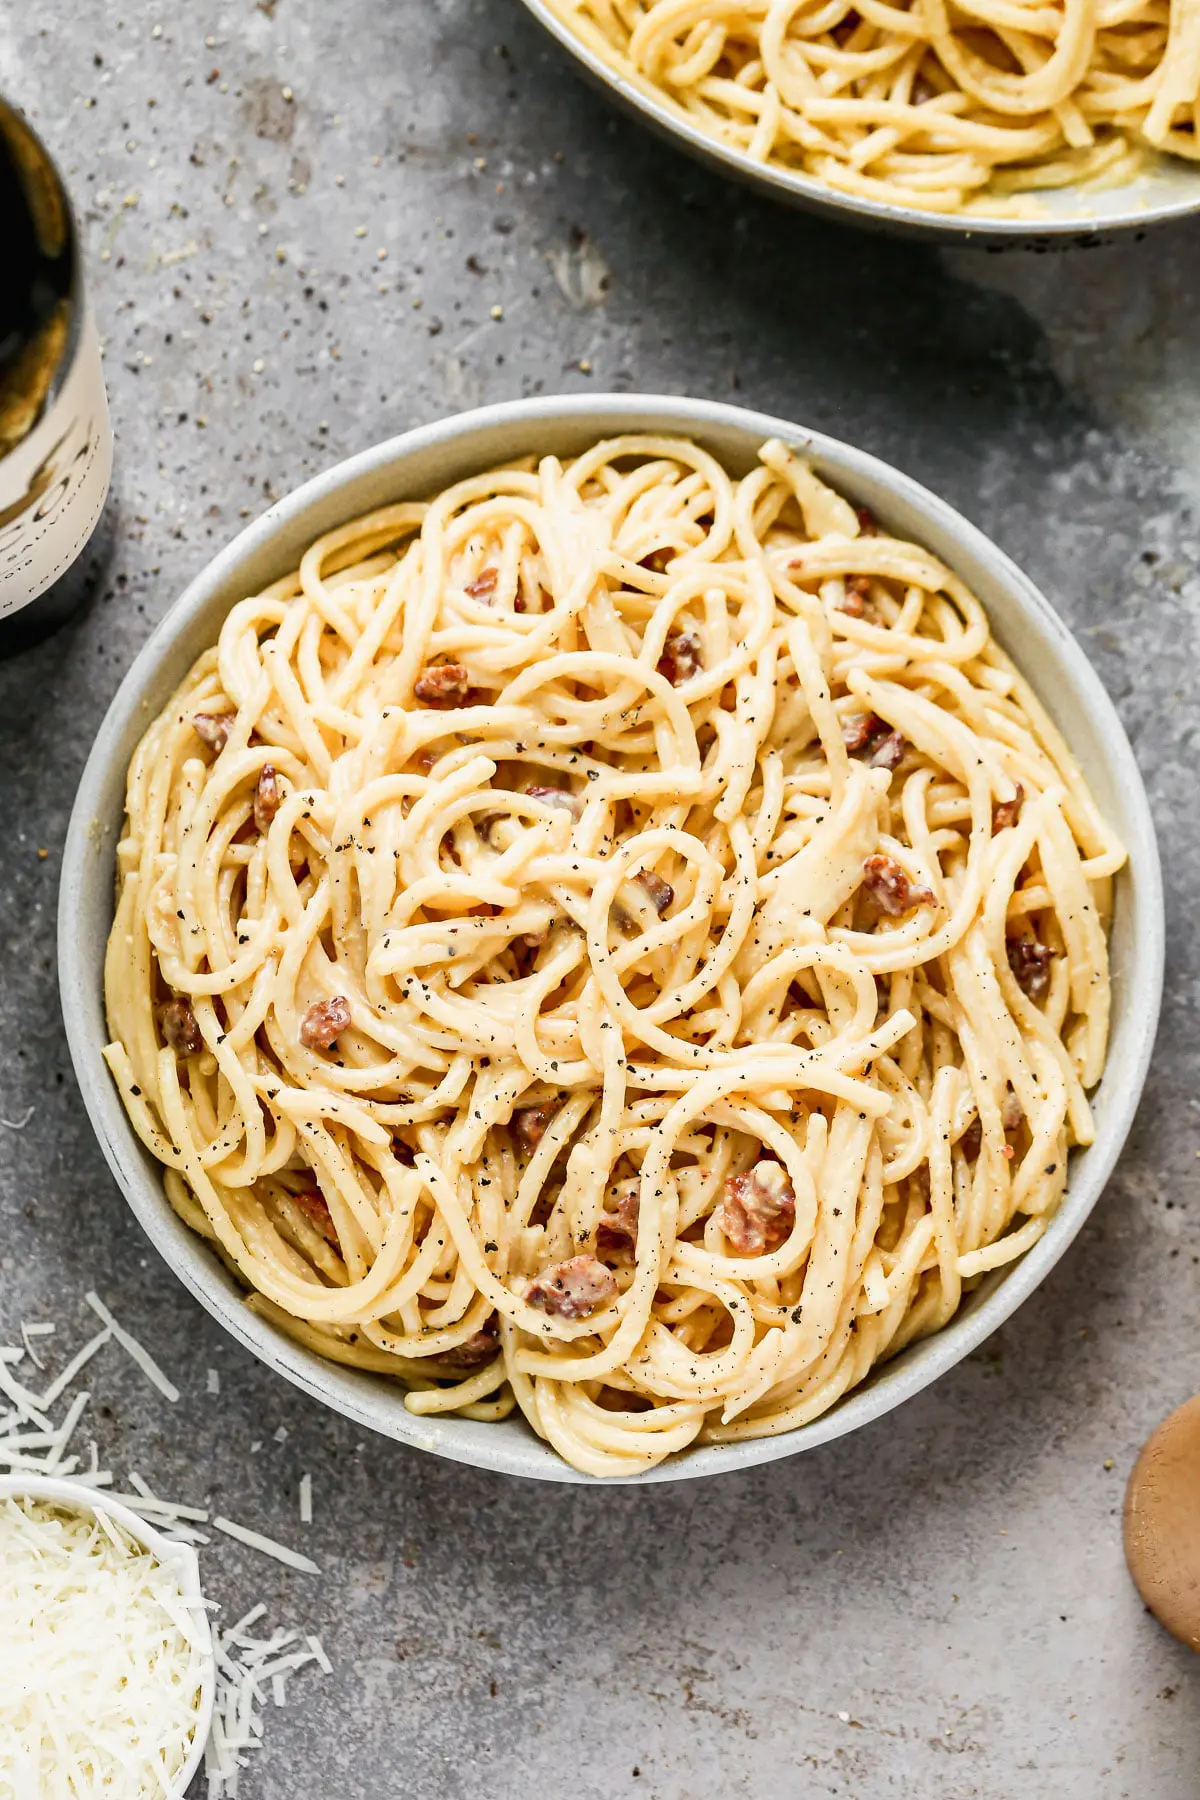 Silky-smooth noodles twirled in a rich, creamy (but cream-less) sauce, nutty pecorino cheese, and bits of salty bacon, our Bucatini Carbonara is the ultimate in Italian comfort food and arguably, the simplest.  Our version amps up the amount of both cheese and bacon, adds in a little bit of garlic, and swaps out classic spaghetti for thick bucatini noodles.